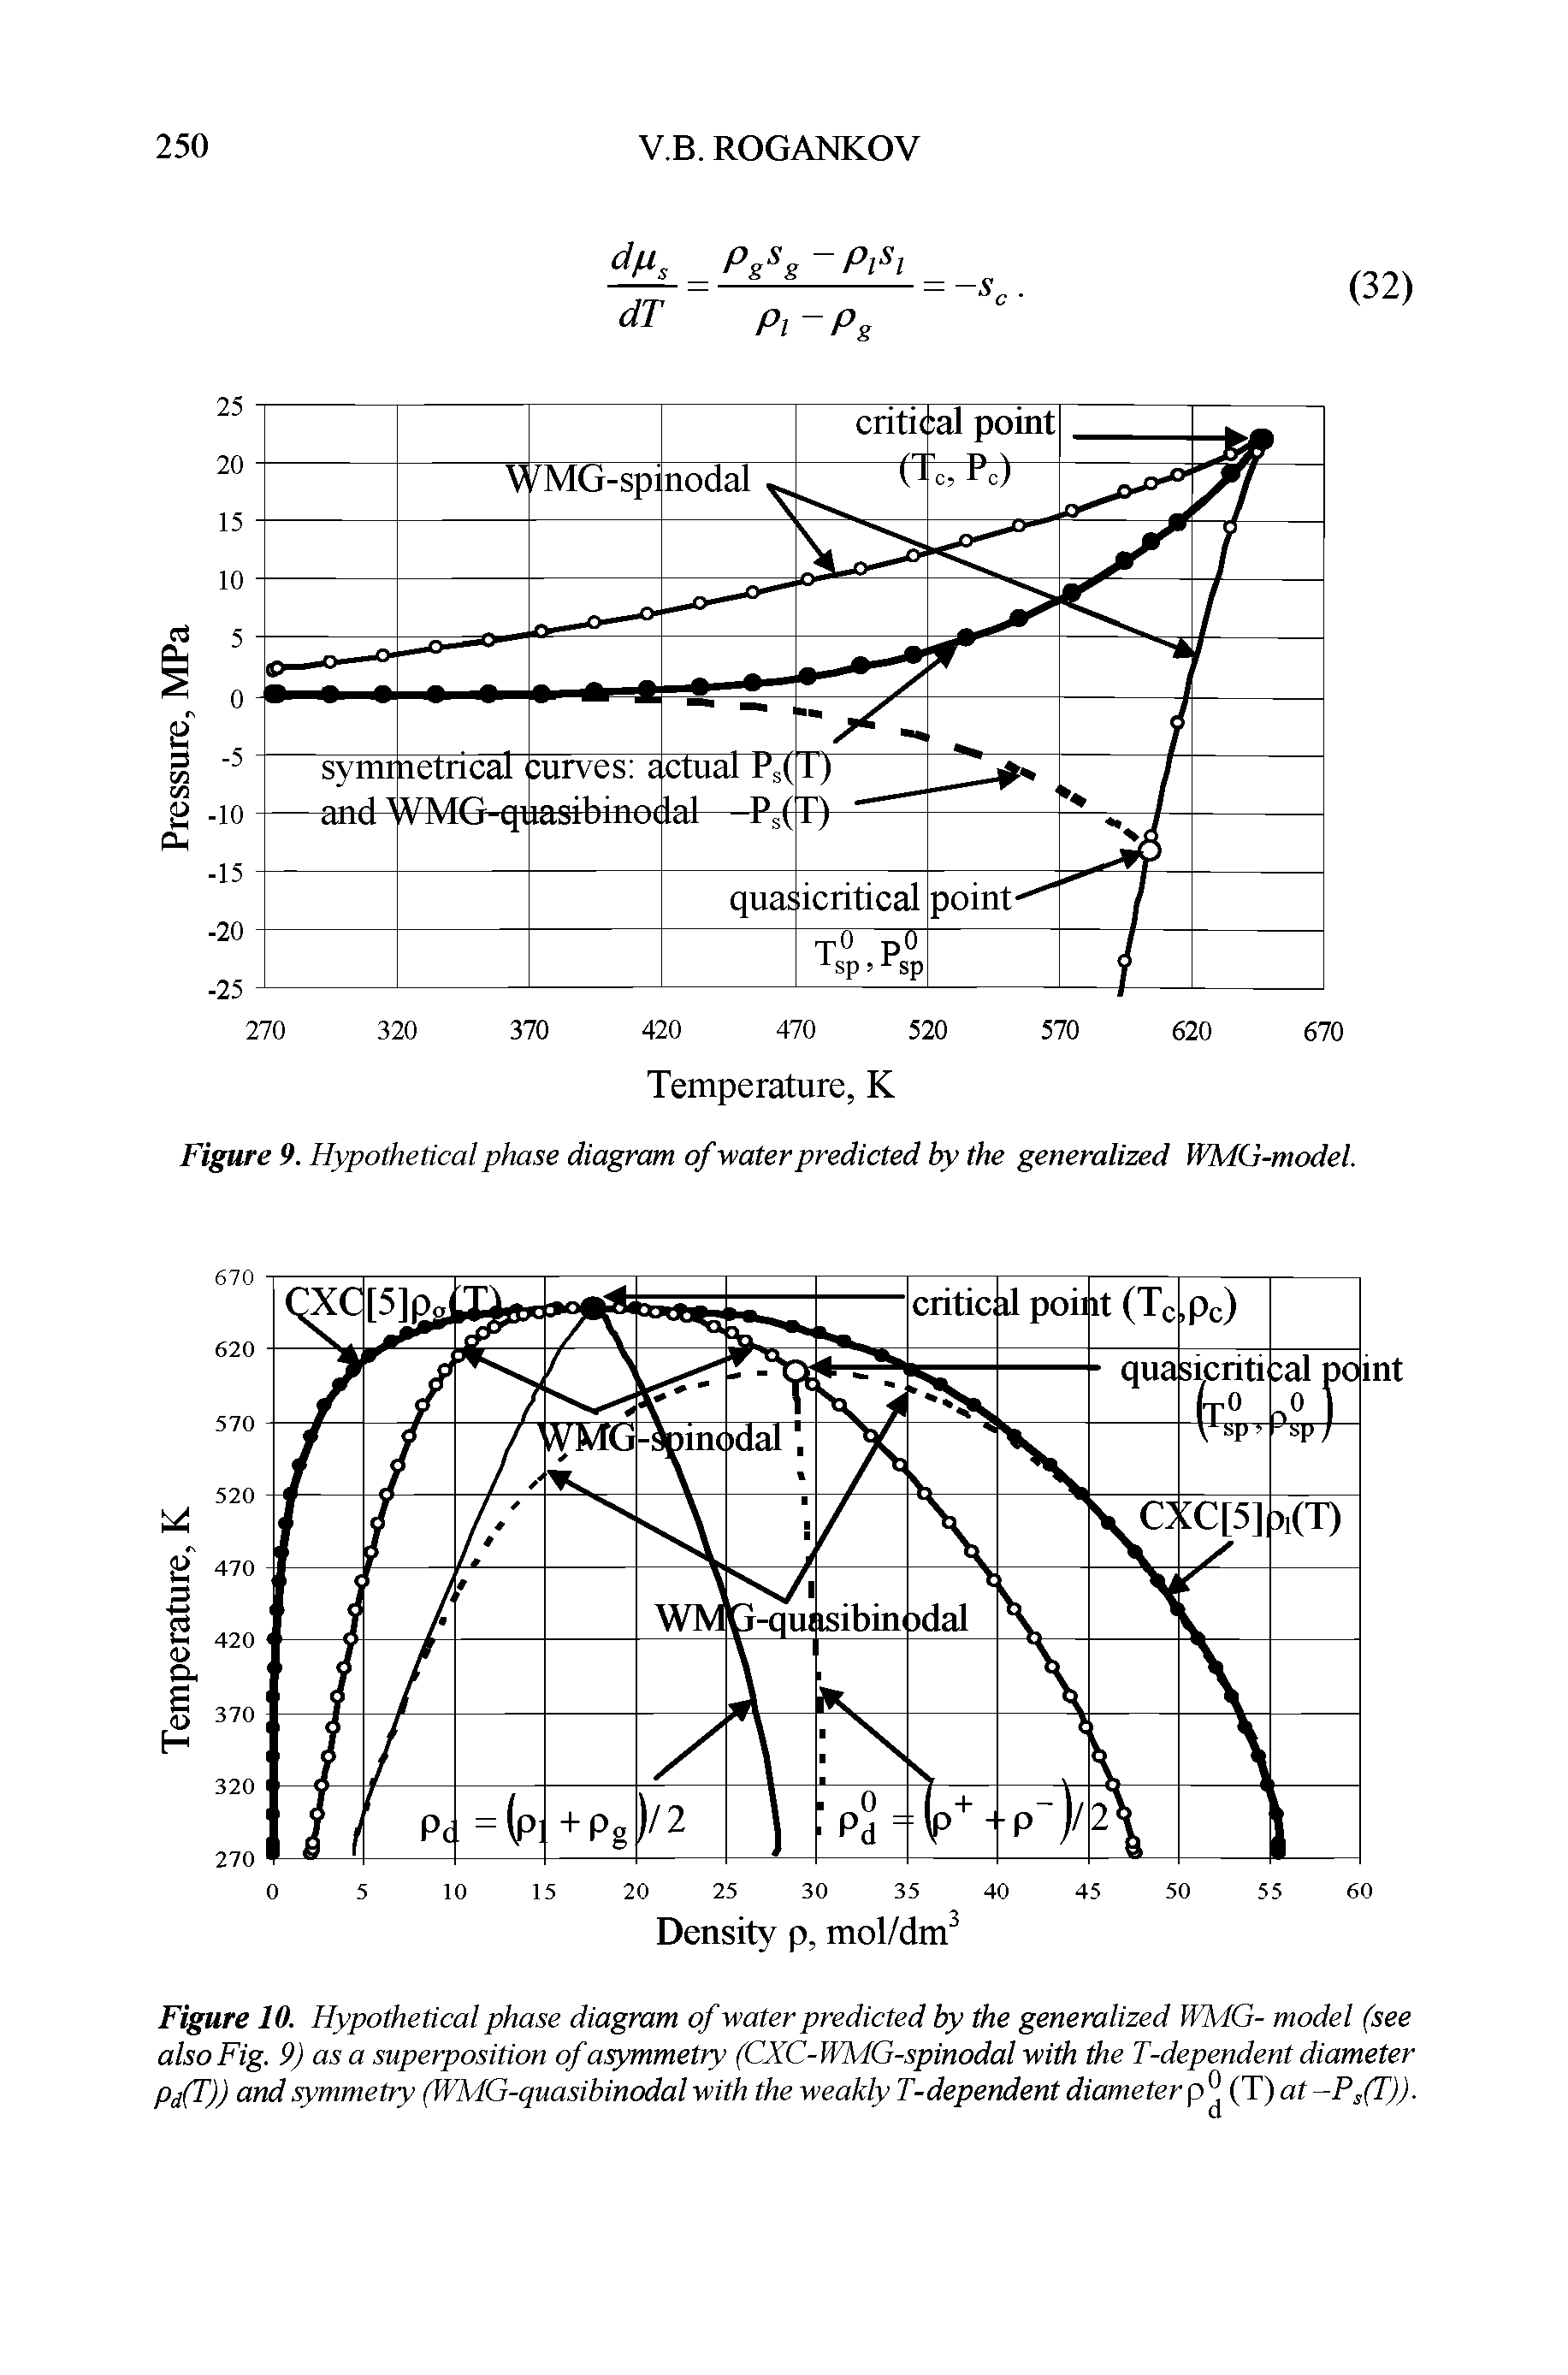 Figure 10. Hypothetical phase diagram of water predicted by the generalized WMG- model (see also Fig. 9) as a superposition of asymmetry (CXC-WMG-spinodal with the T-dependent diameter pd(T)) and symmetry (WMG-quasibinodal with the weakly T-dependent diameter (T) at-Ps(T)).